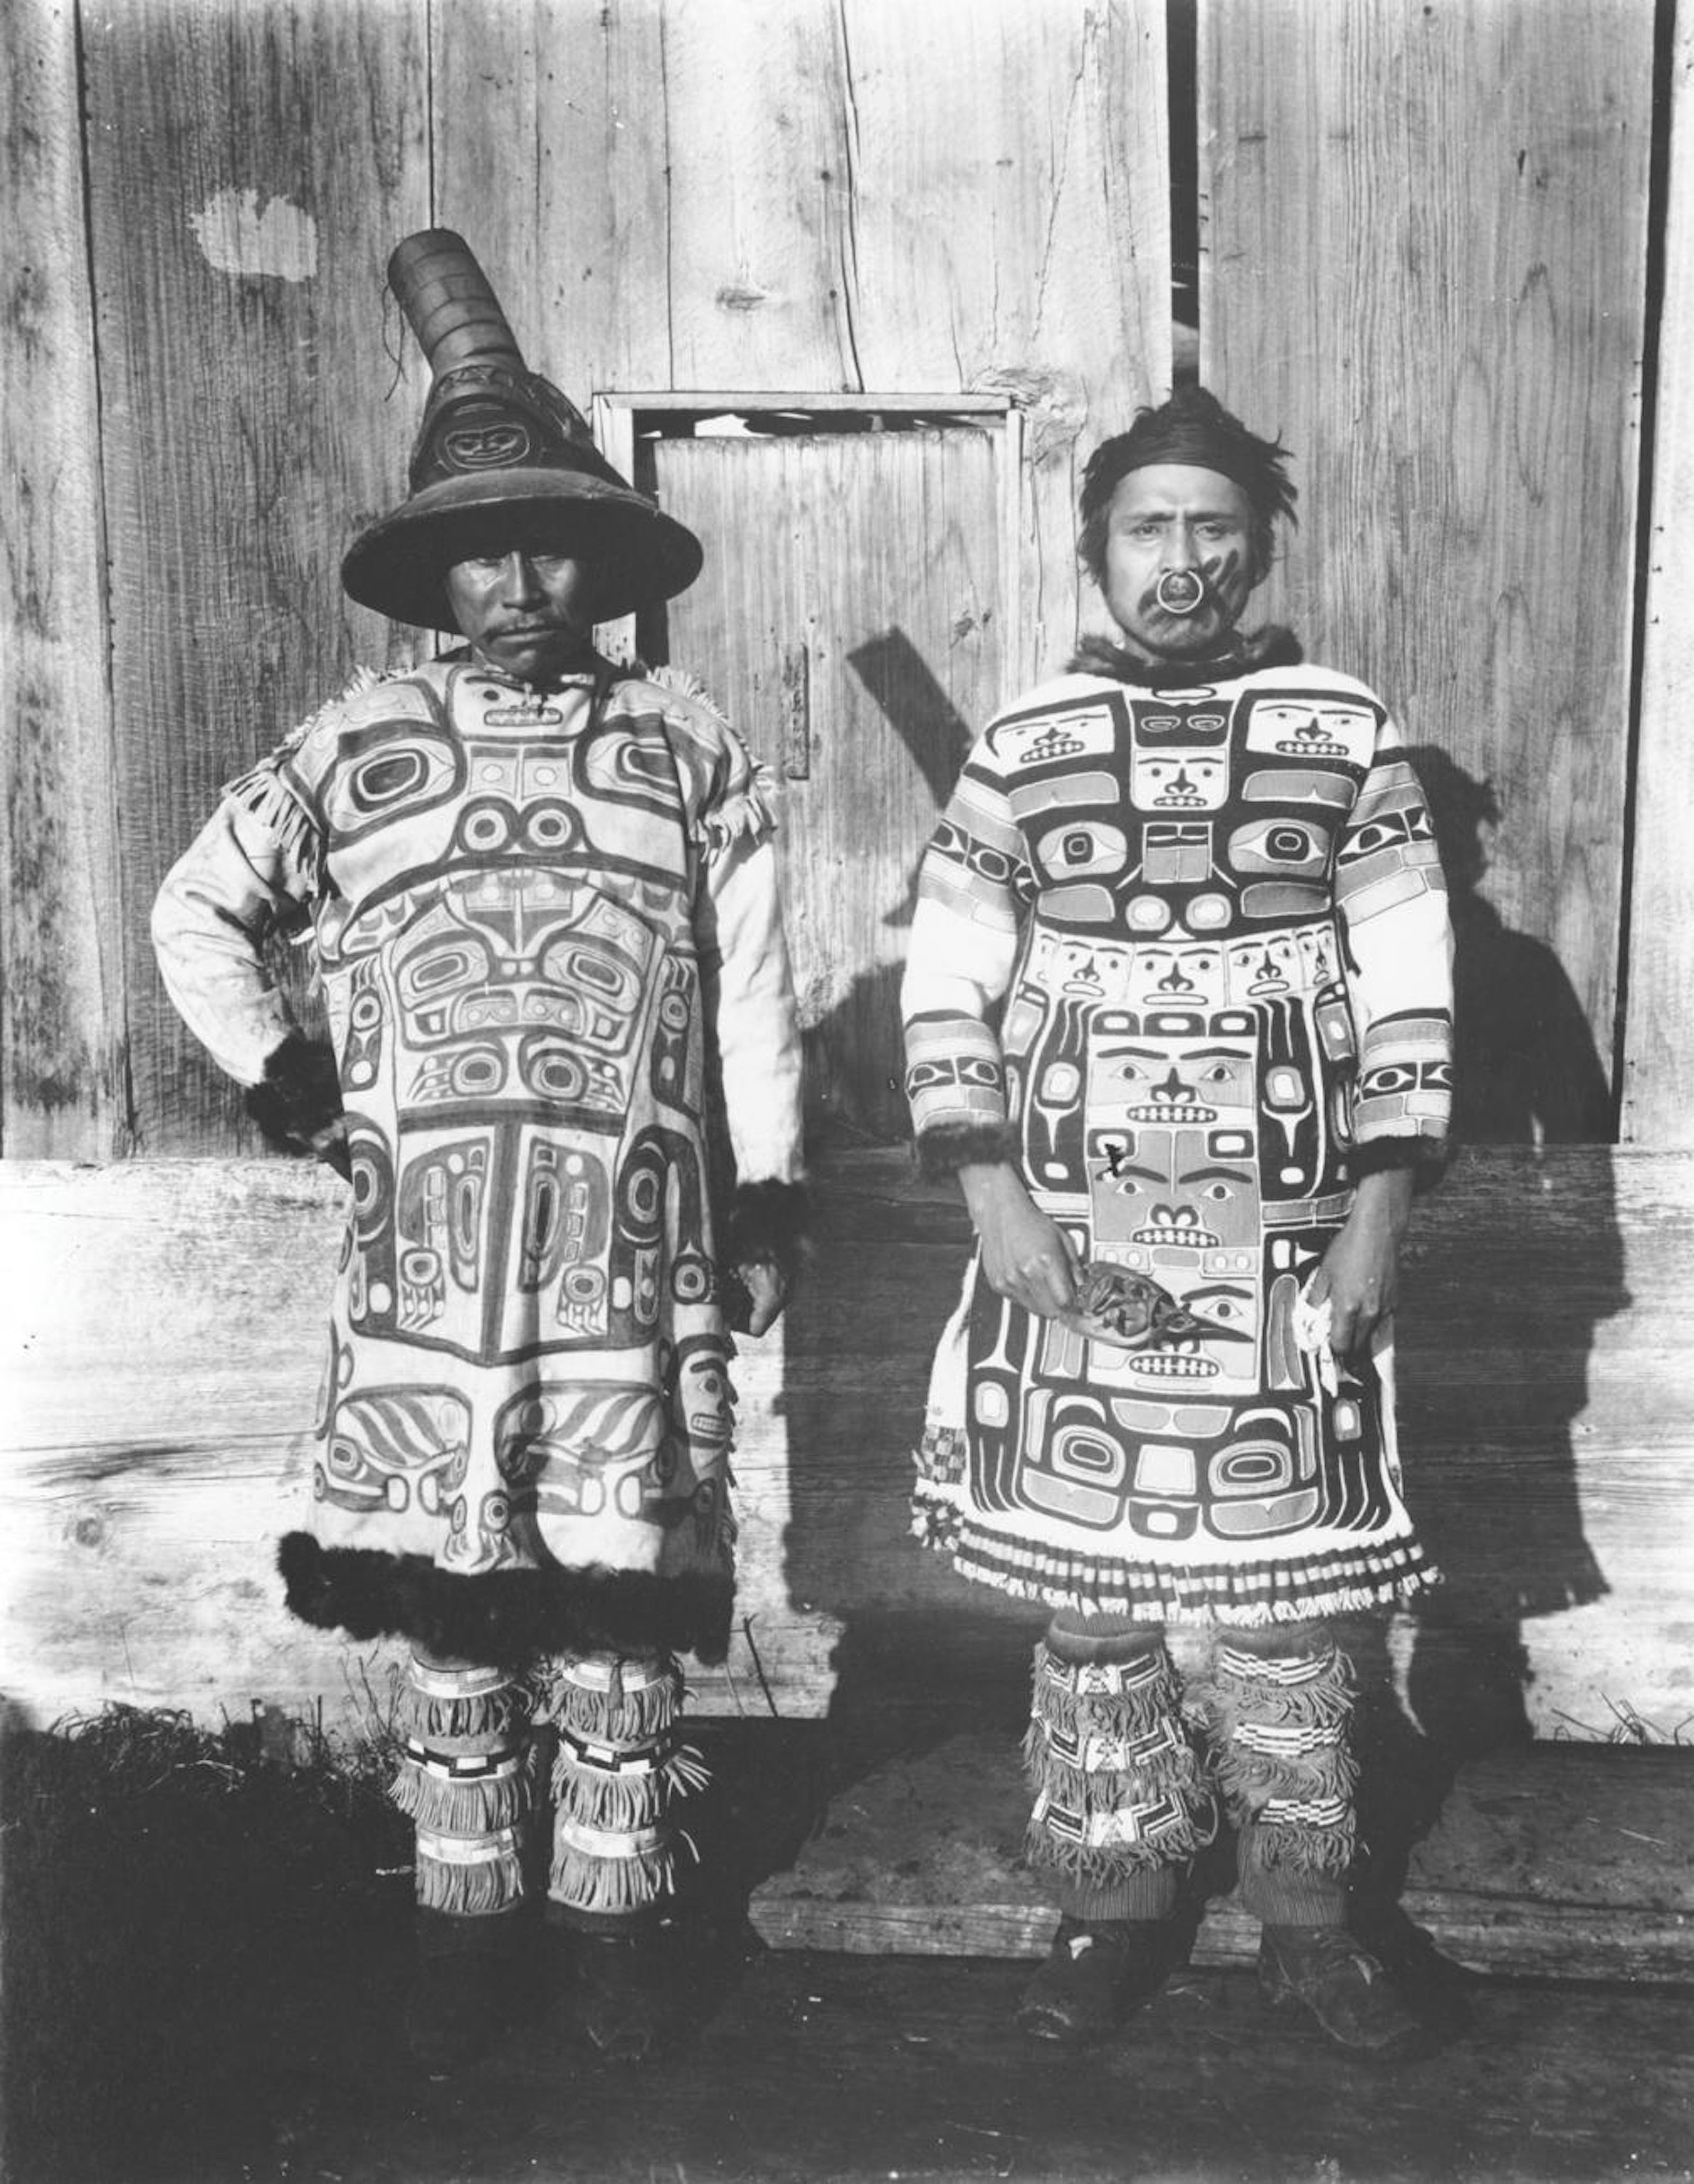 Photograph of two chiefs in Alaska